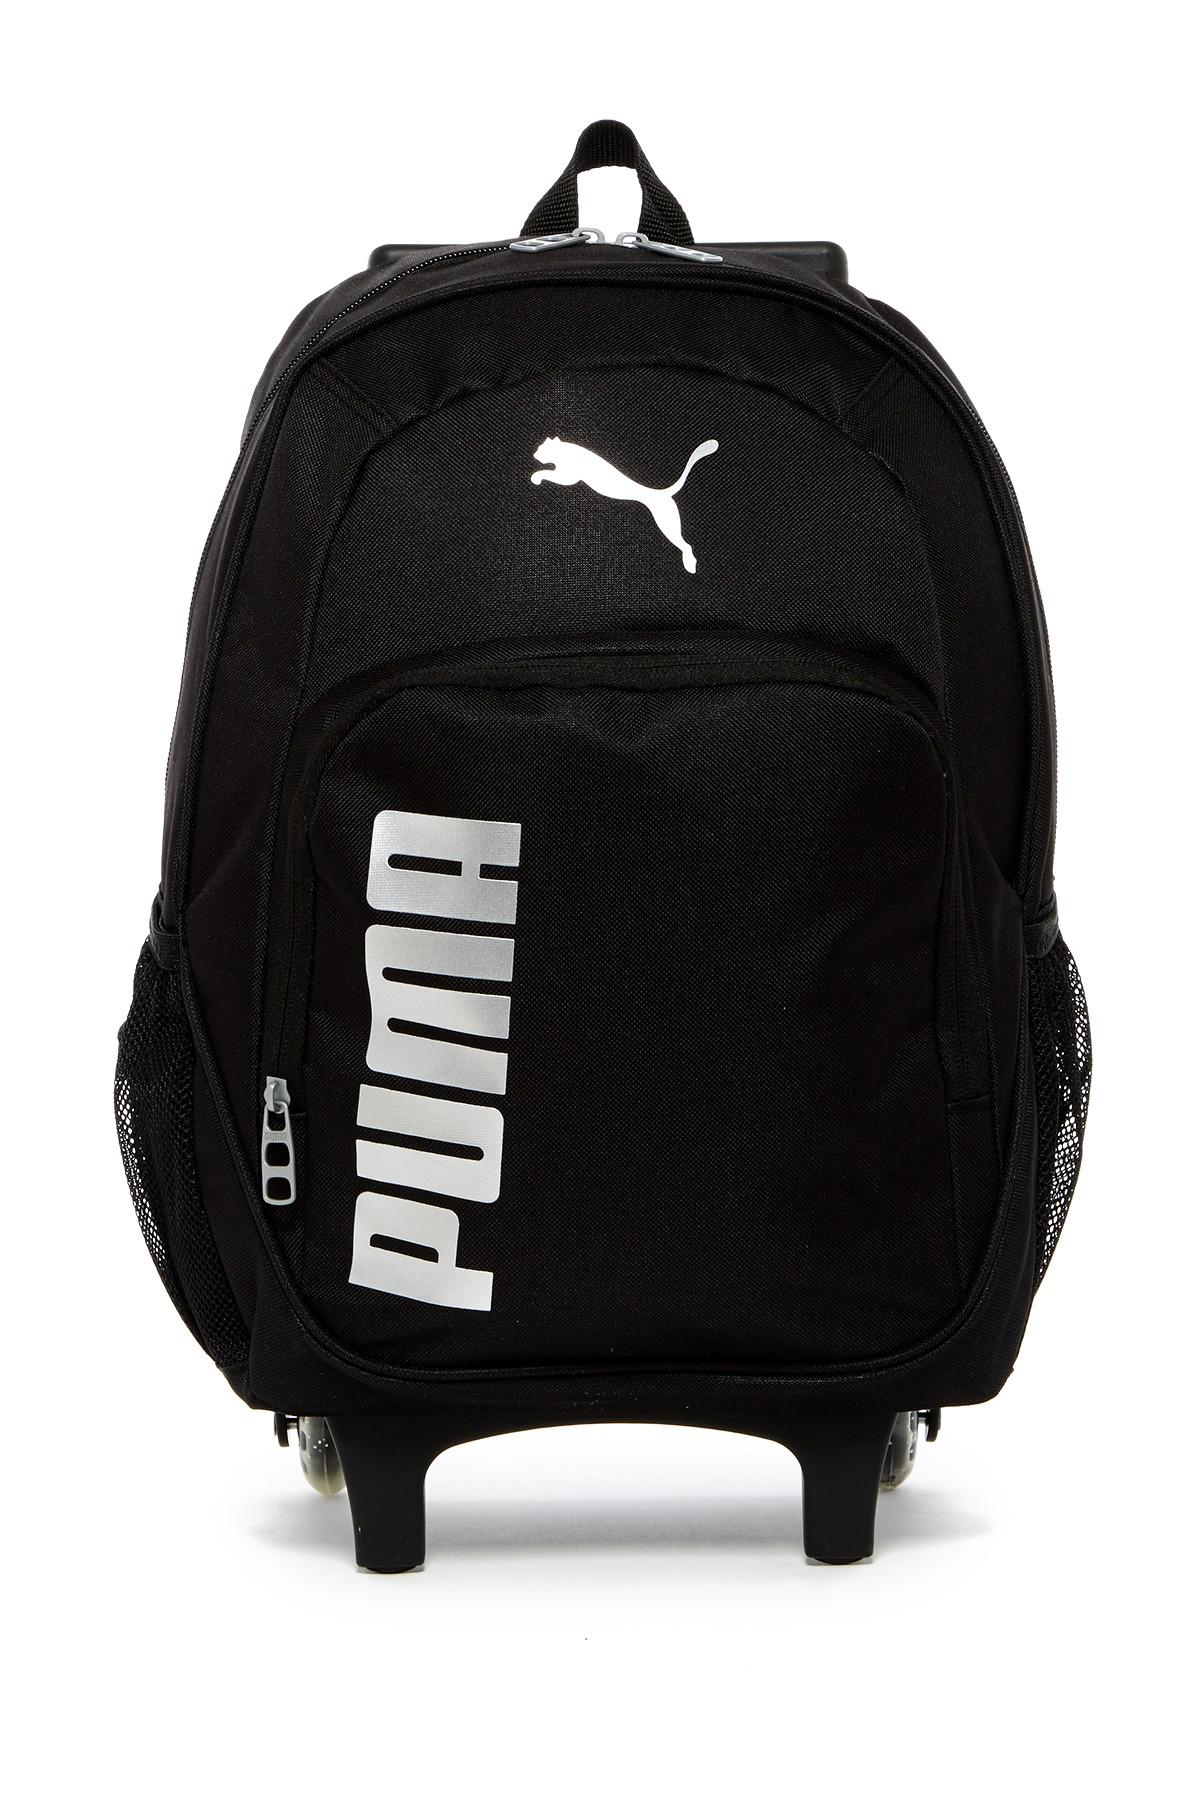 PUMA Rolling Wheeled Backpack in Black-Silver (Black) for Men | Lyst